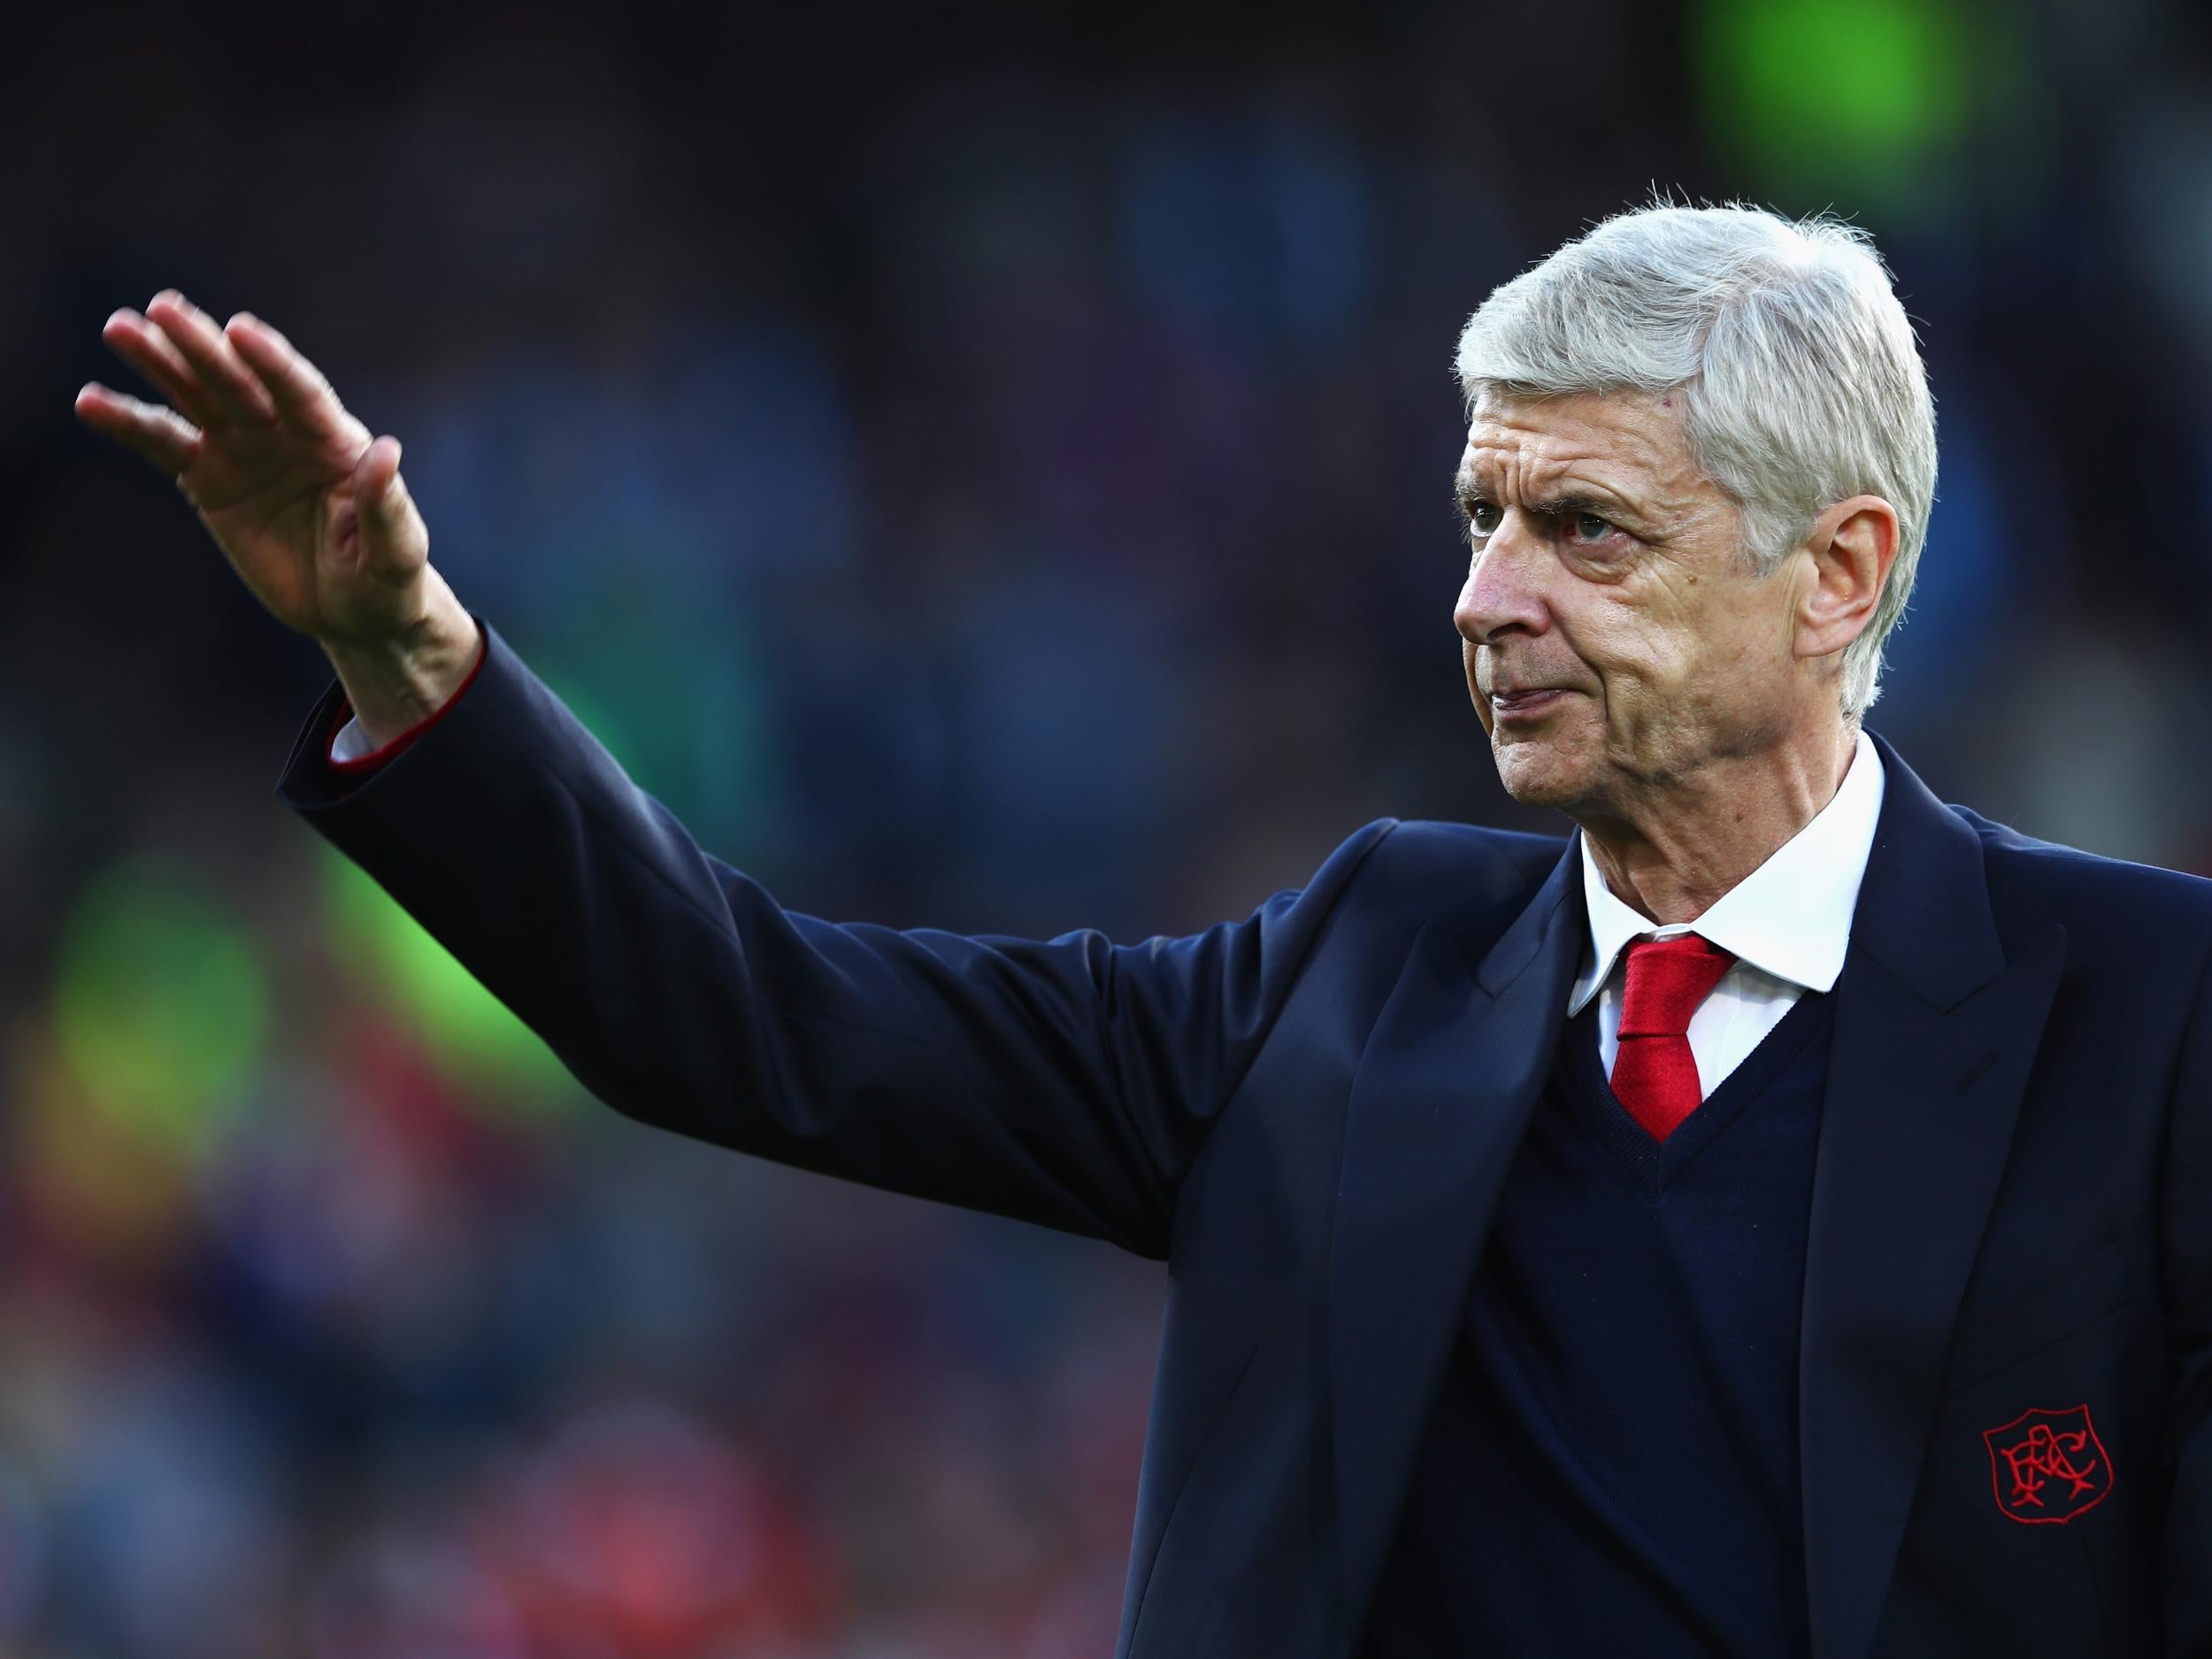 The speculation over Wenger's future in football management continues